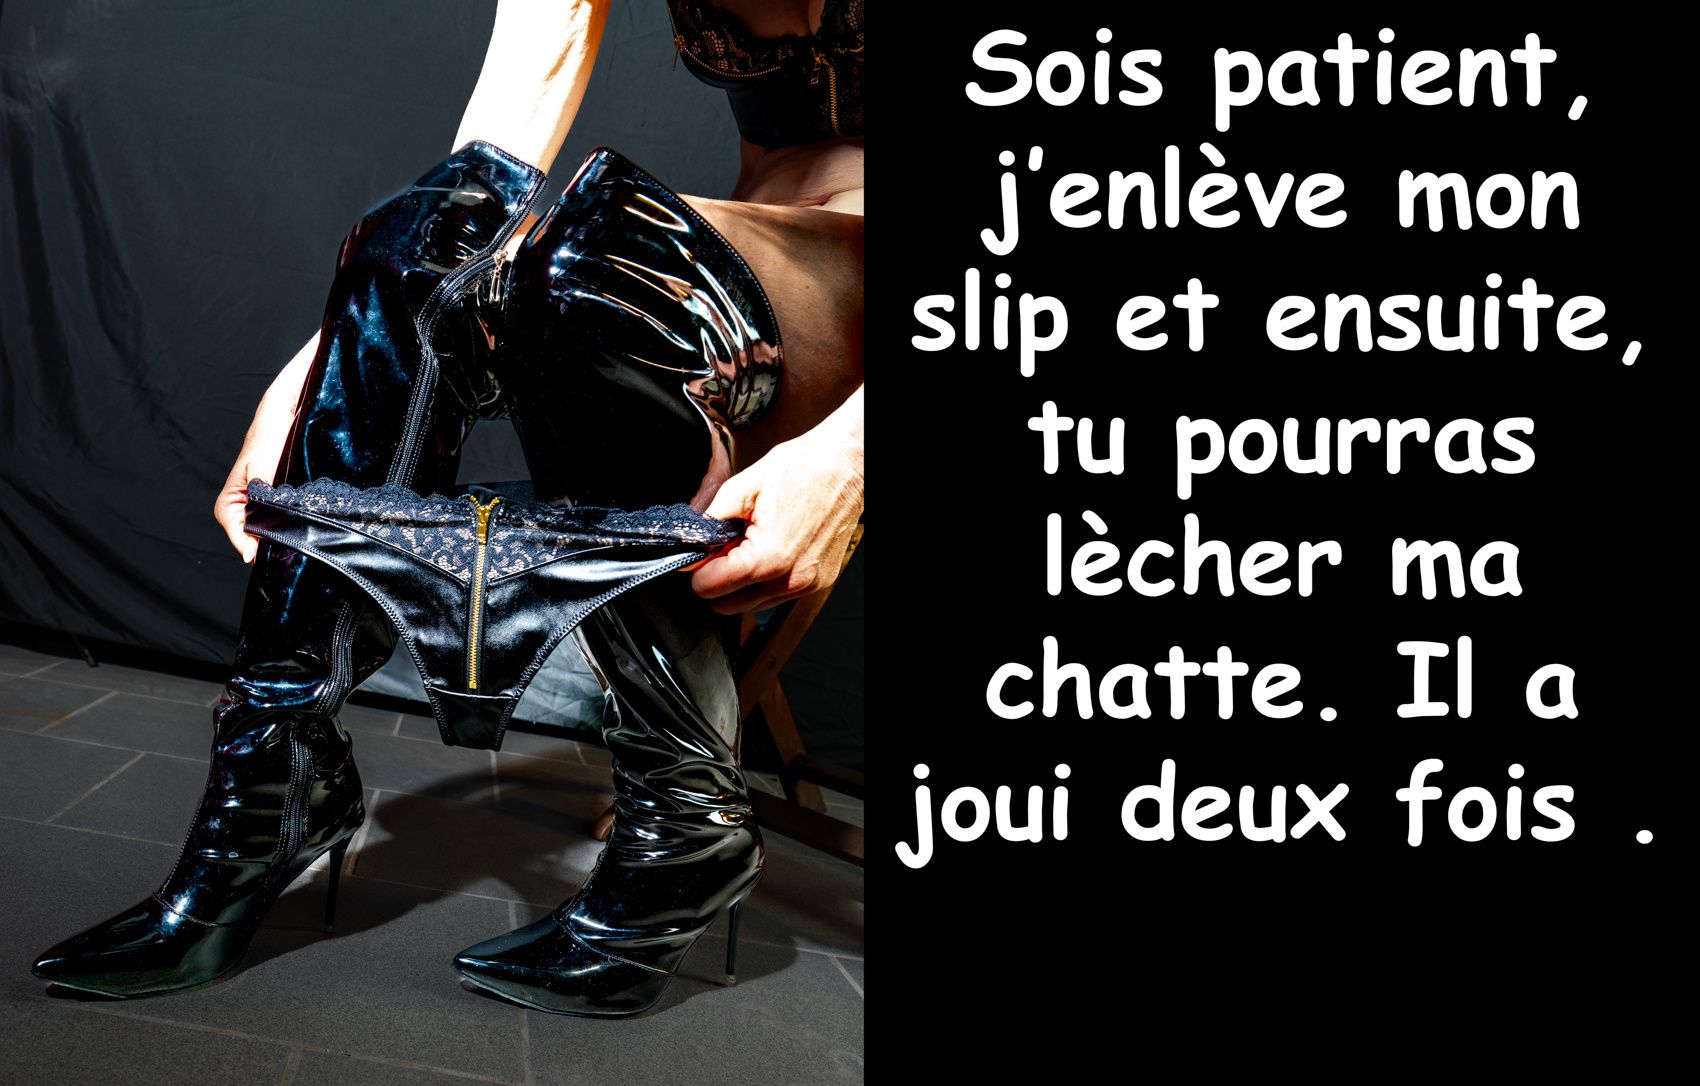 captions about chastity and femdom 450-550 #60